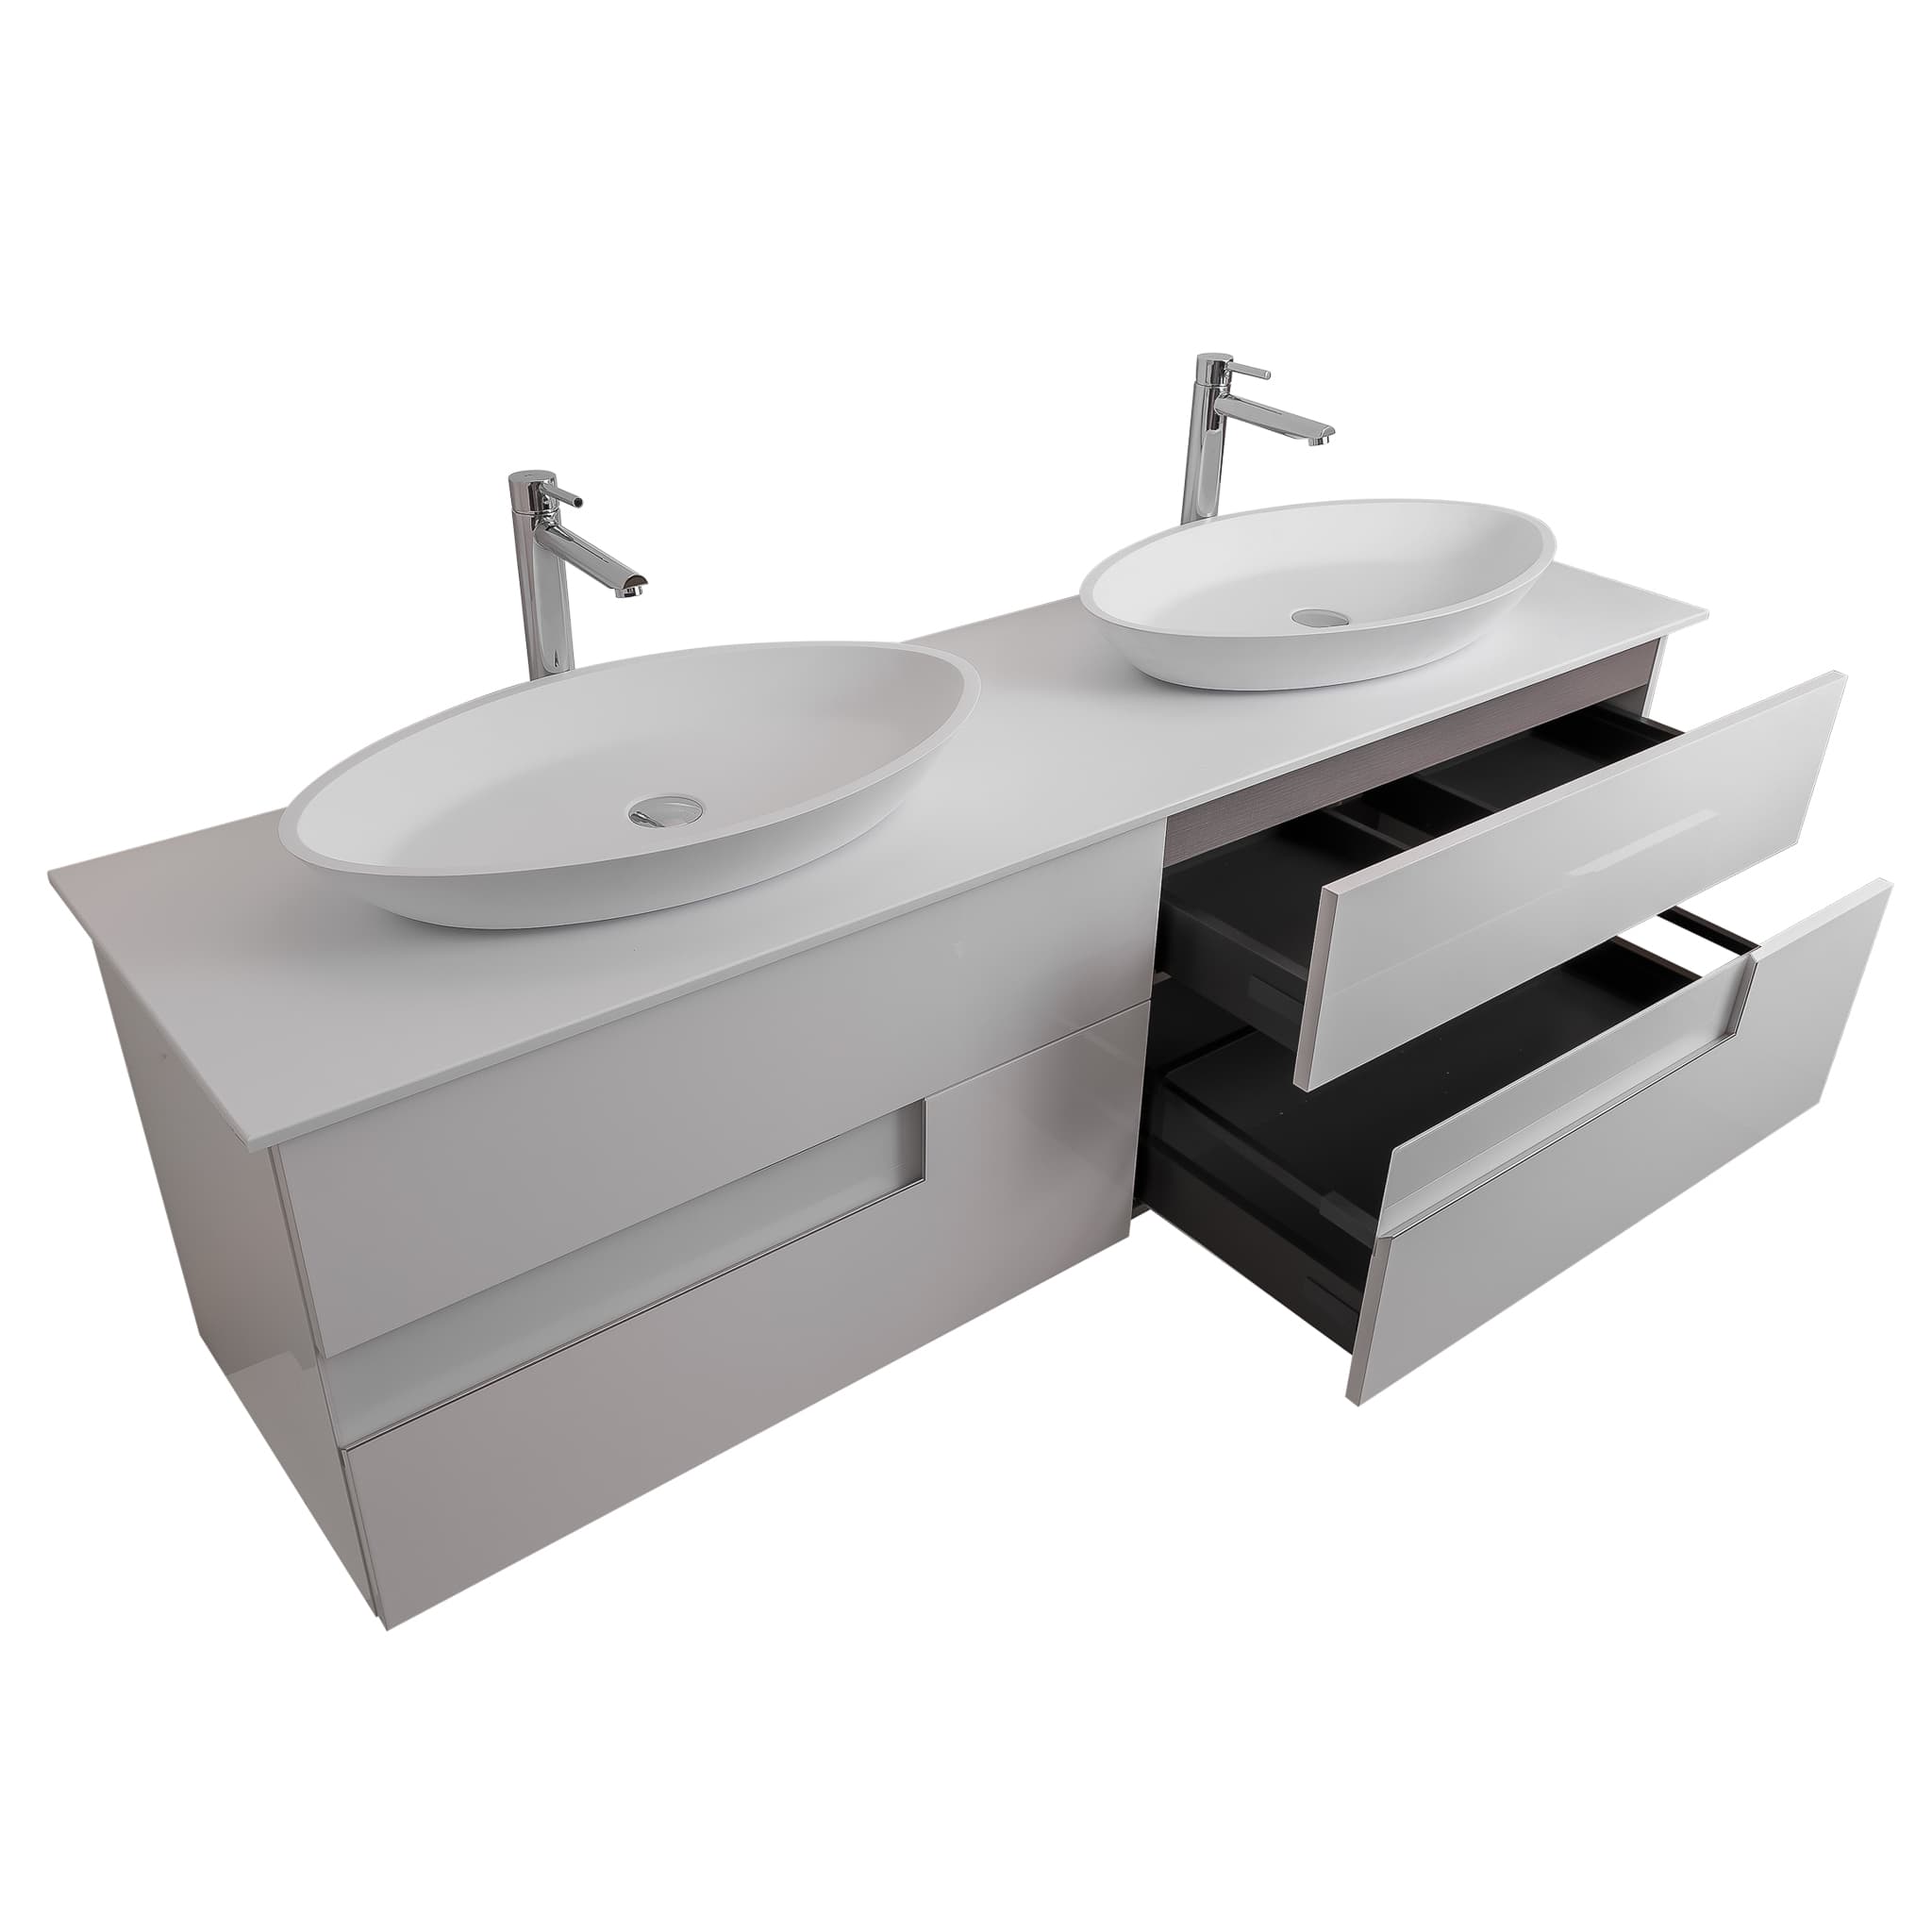 Vision 72 White High Gloss Cabinet, Solid Surface Flat White Counter And Two Oval Solid Surface White Basin 1305, Wall Mounted Modern Vanity Set